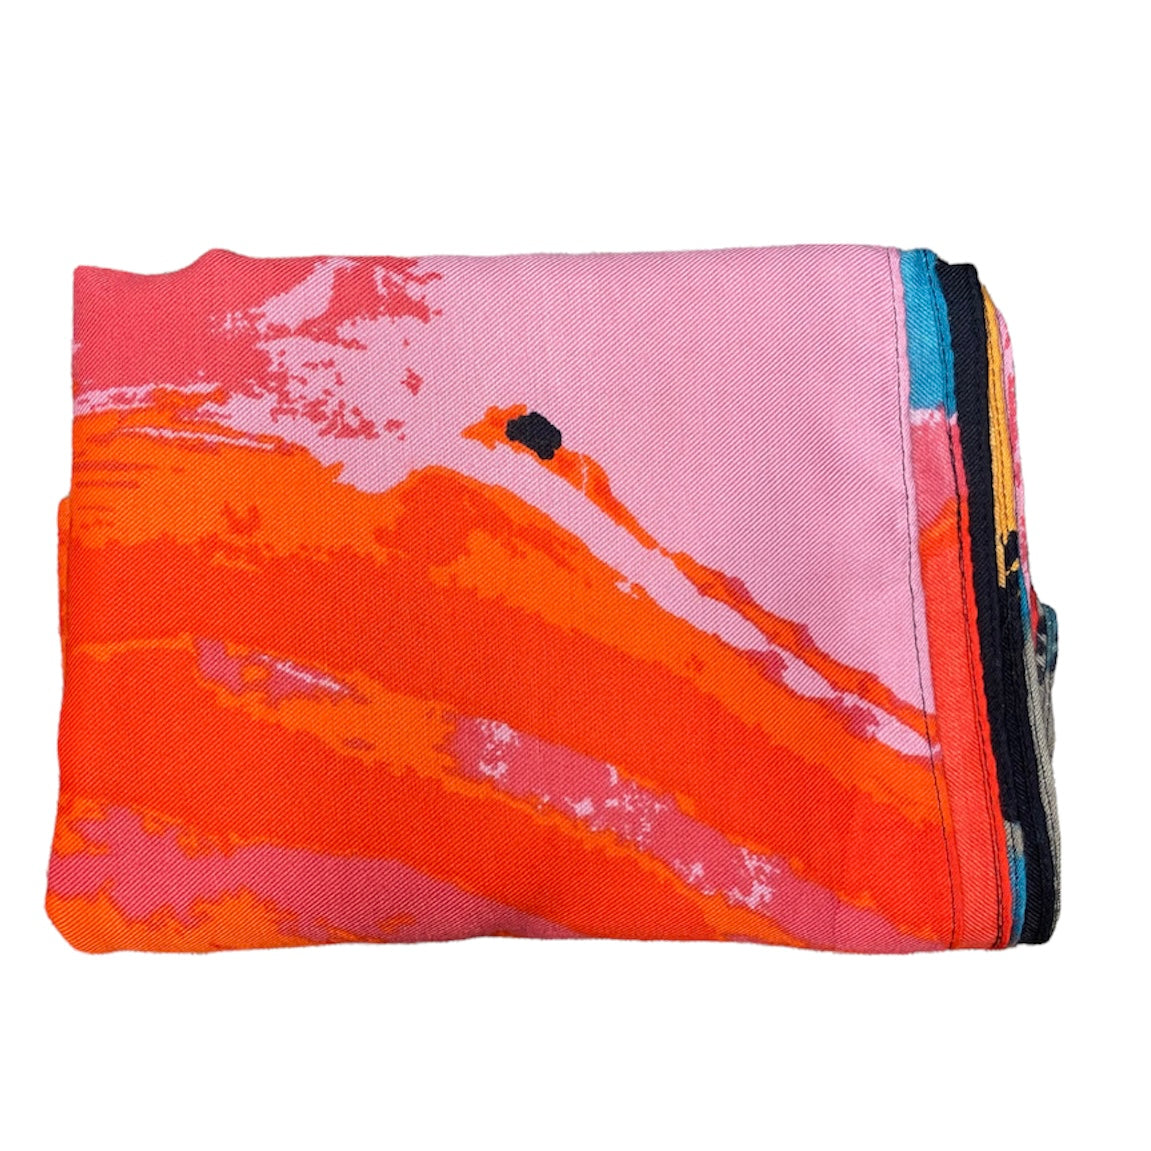 ABSTRACT WAVES SCARF - PINK